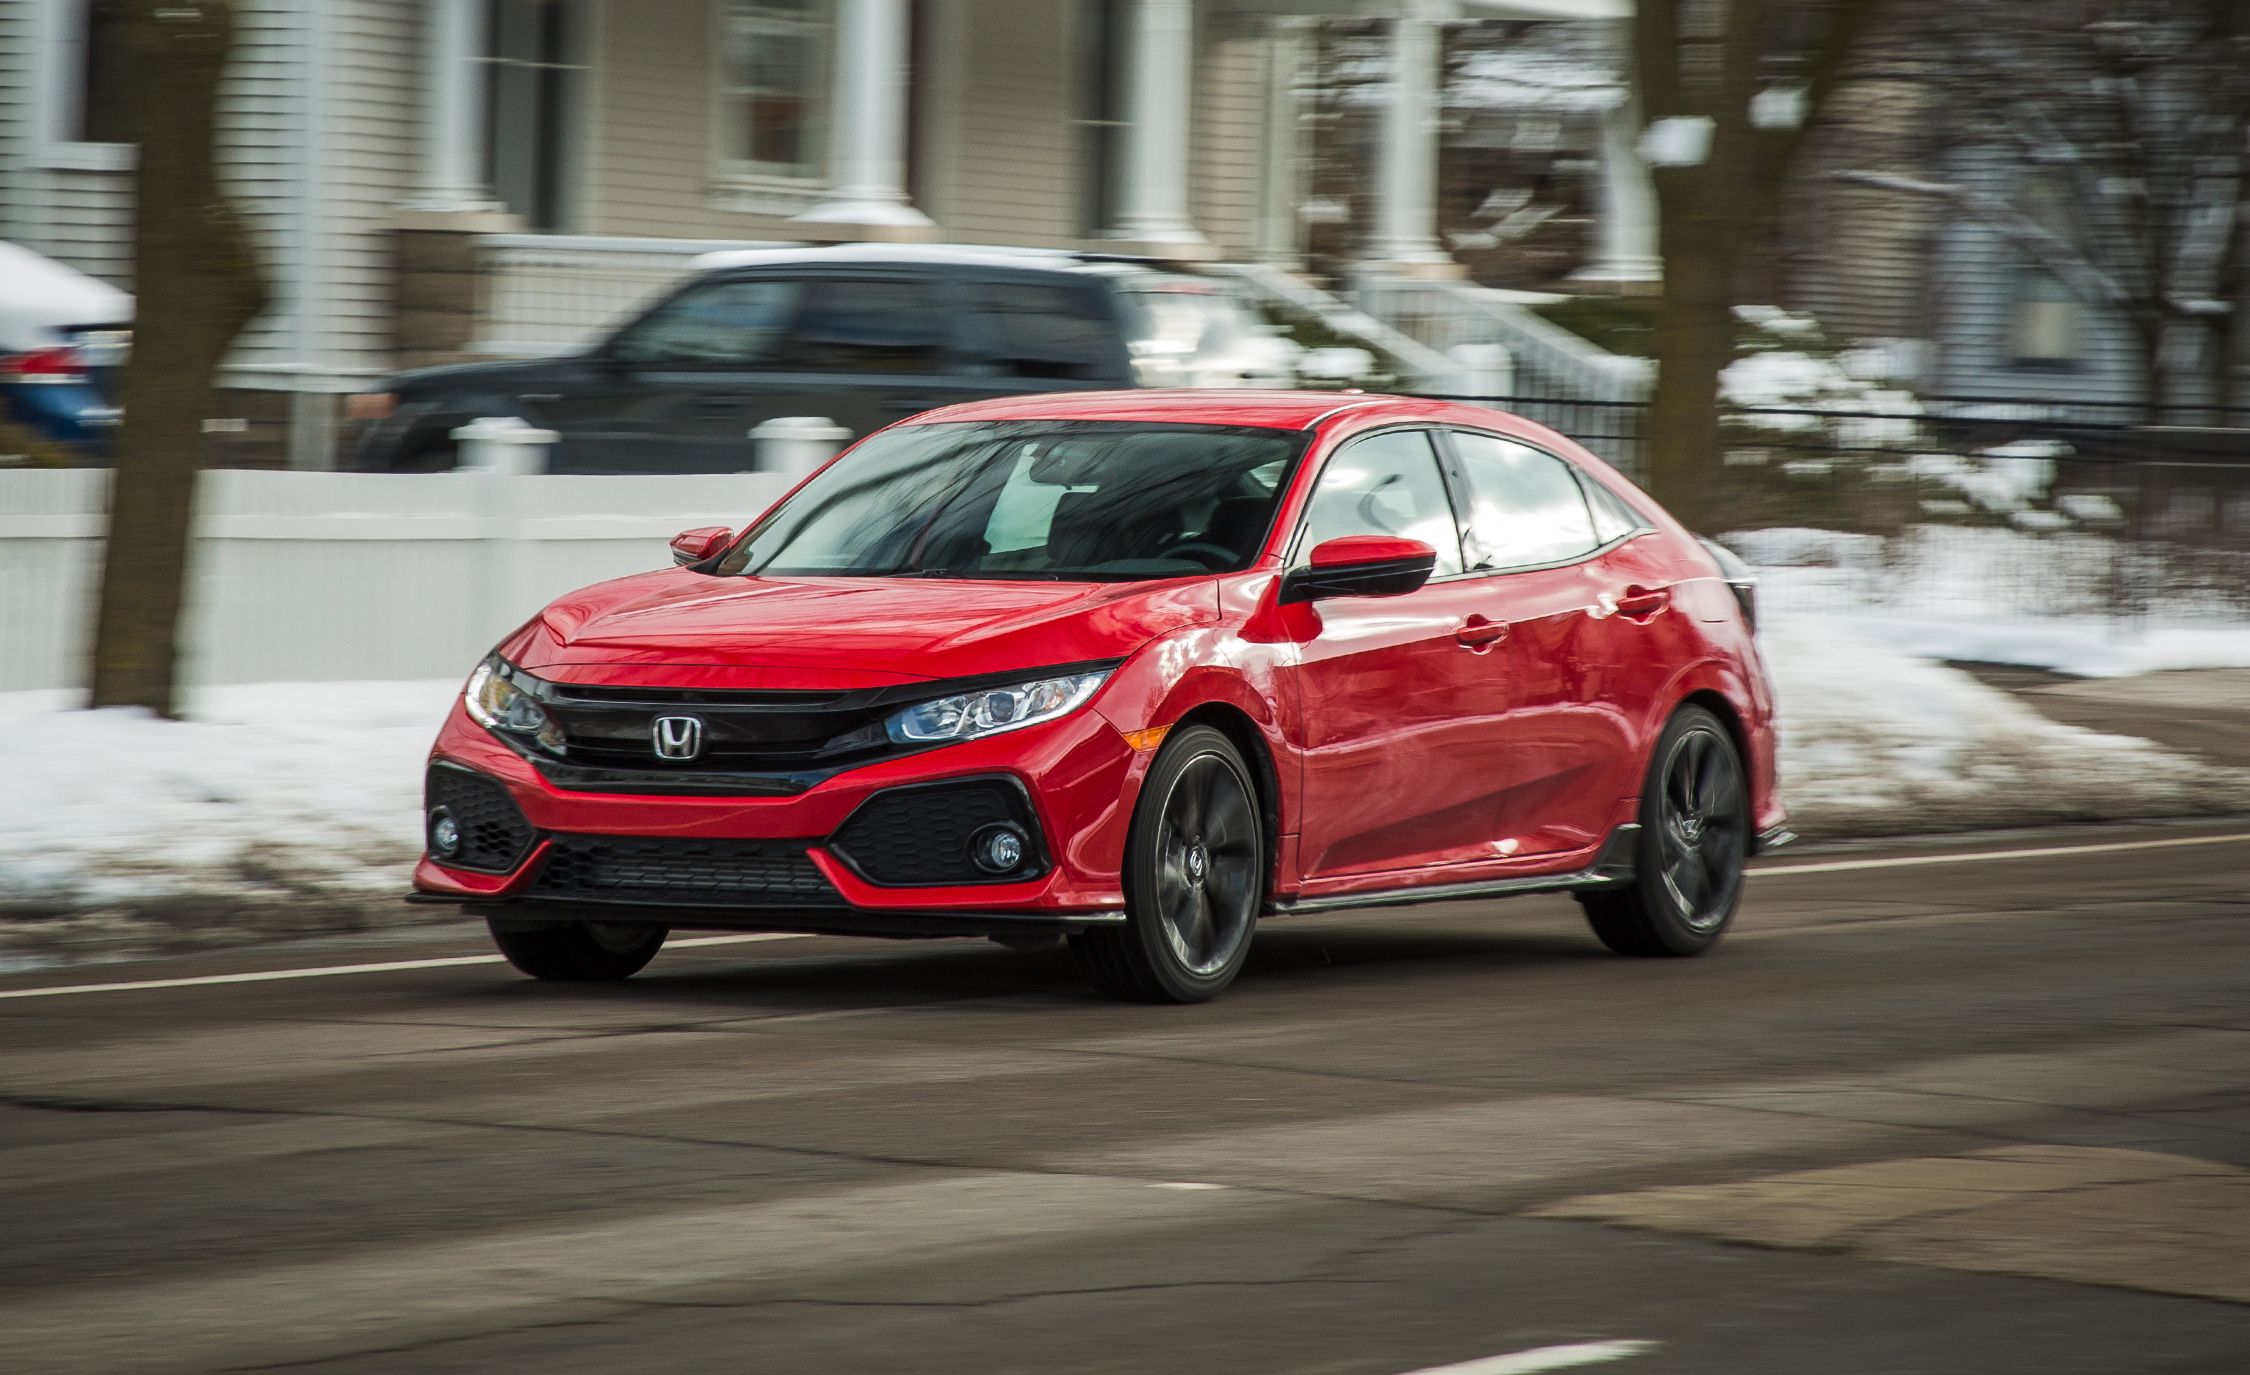 17 Honda Civic Hatchback 1 5t Manual Test Review Car And Driver